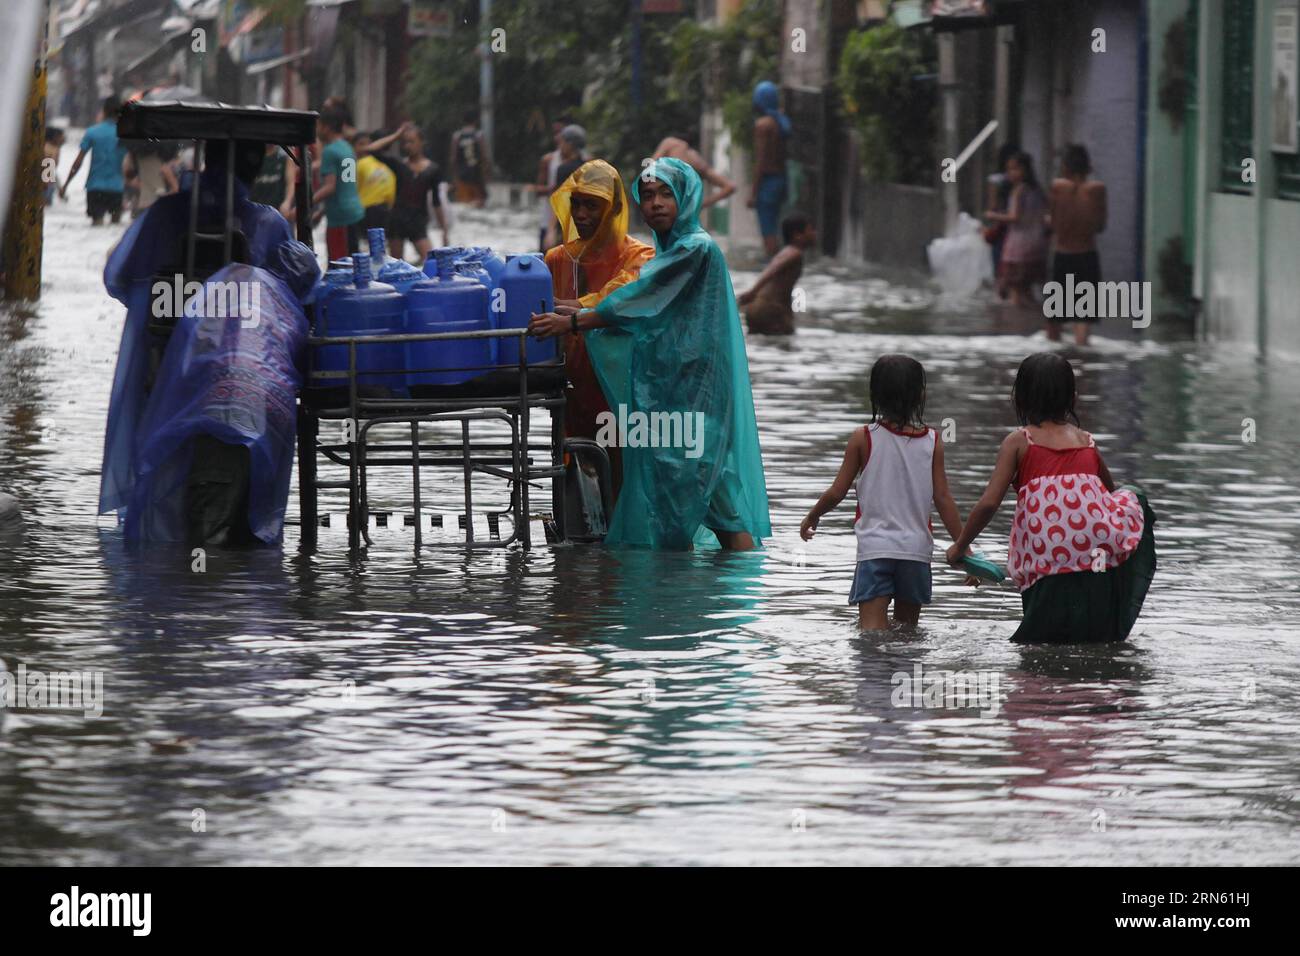 (150708) -- MALABON CITY, July 8, 2015 -- Residents wade through a flooded street in Malabon City, the Philippines, July 8, 2015. Typhoon Chan-hom (local name Falcon) with maximum sustained winds of 130 kph near the center and gustiness of up to 160 kph brought heavy rain, strong winds, lightning and floods in northern Philippines, causing school and office suspensions, and cancellations in air and sea travel. ) (lrz) PHILIPPINES-MALABON CITY-FLOOD RouellexUmali PUBLICATIONxNOTxINxCHN   150708 Malabon City July 8 2015 Residents Calf Through a flooded Street in Malabon City The Philippines July Stock Photo